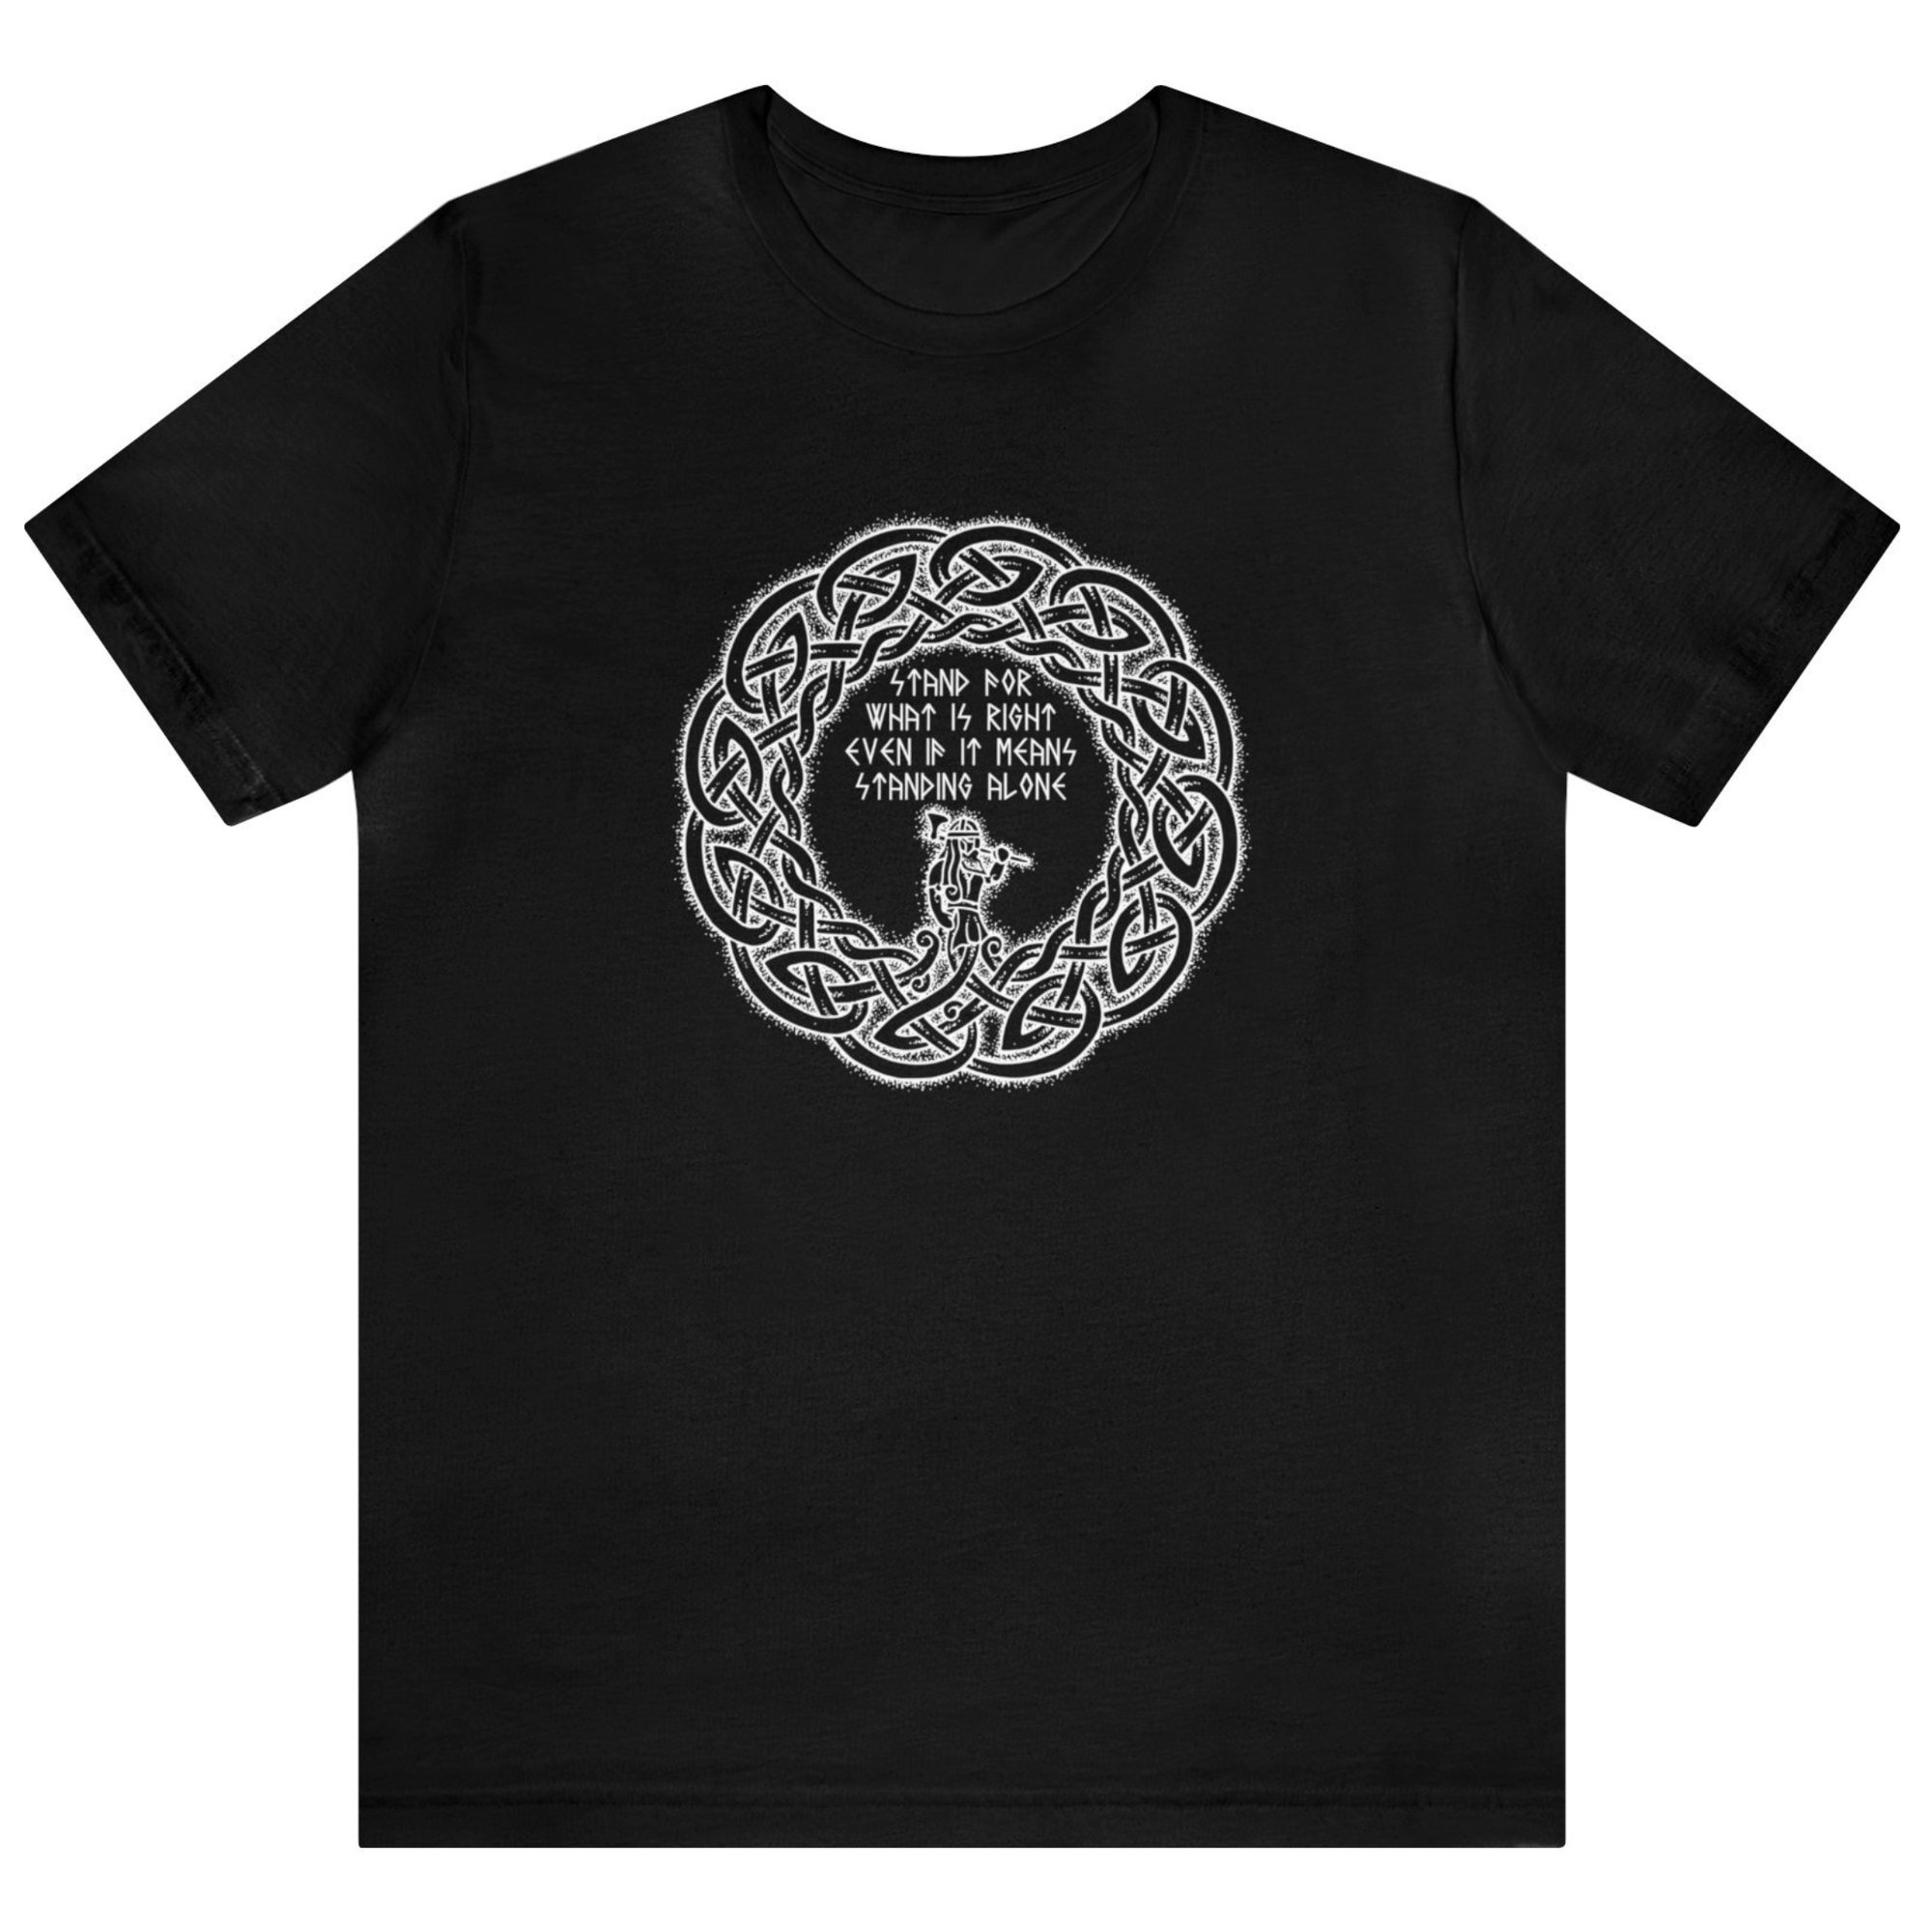 T-Shirt Stand for What is Right Viking T-Shirt Ancient Treasures Ancientreasures Viking Odin Thor Mjolnir Celtic Ancient Egypt Norse Norse Mythology